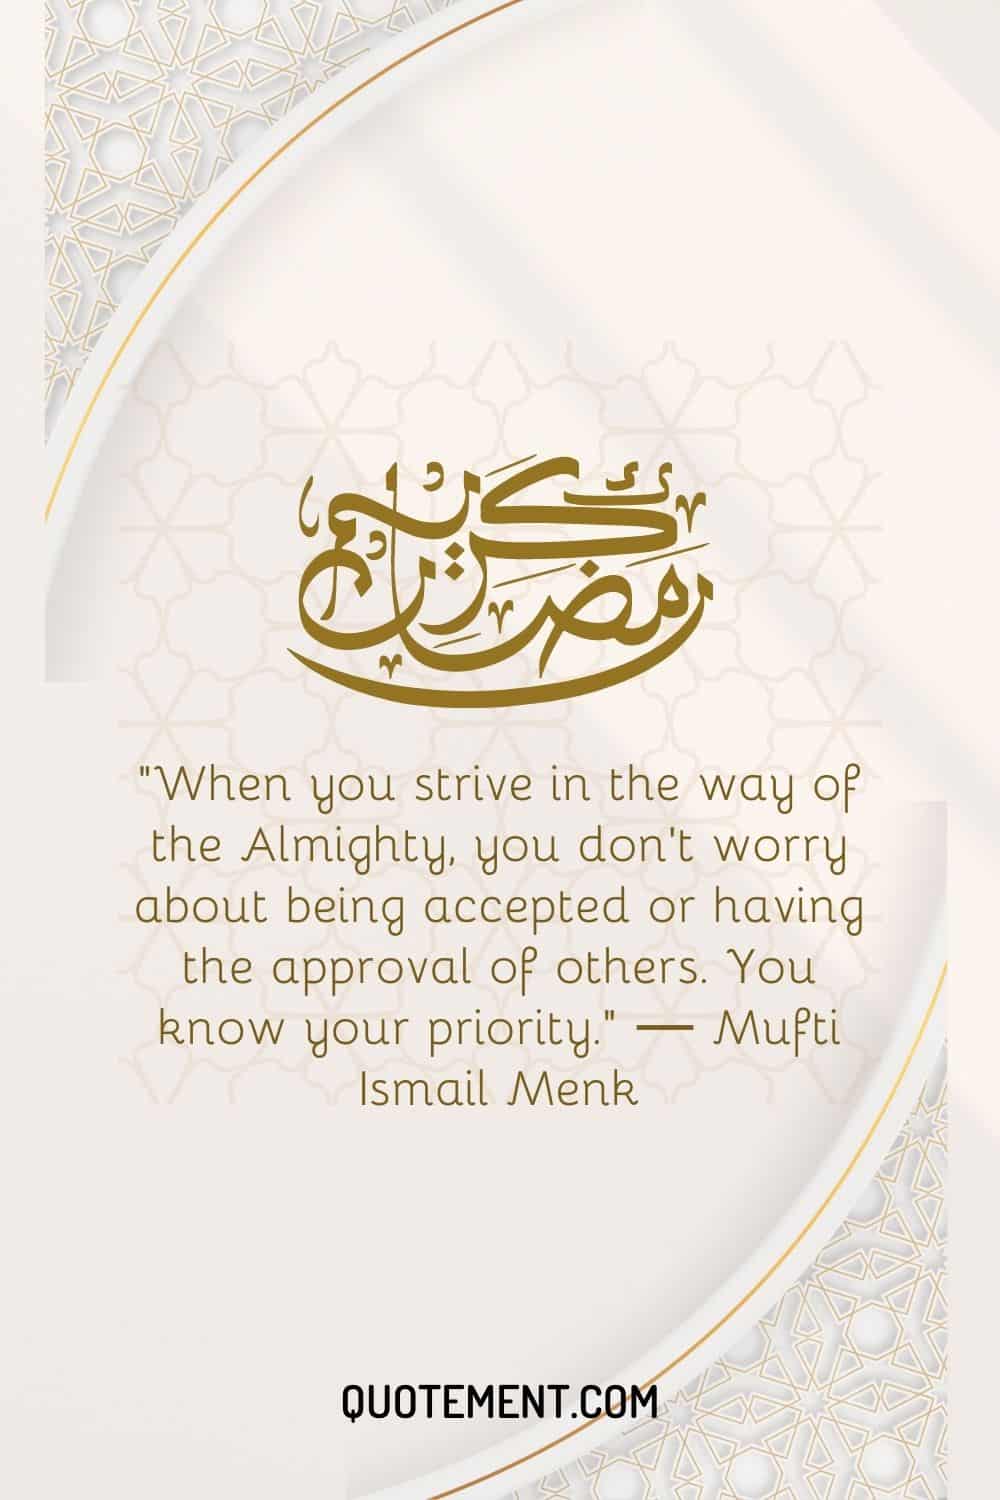 When you strive in the way of the Almighty, you don't worry about being accepted or having the approval of others